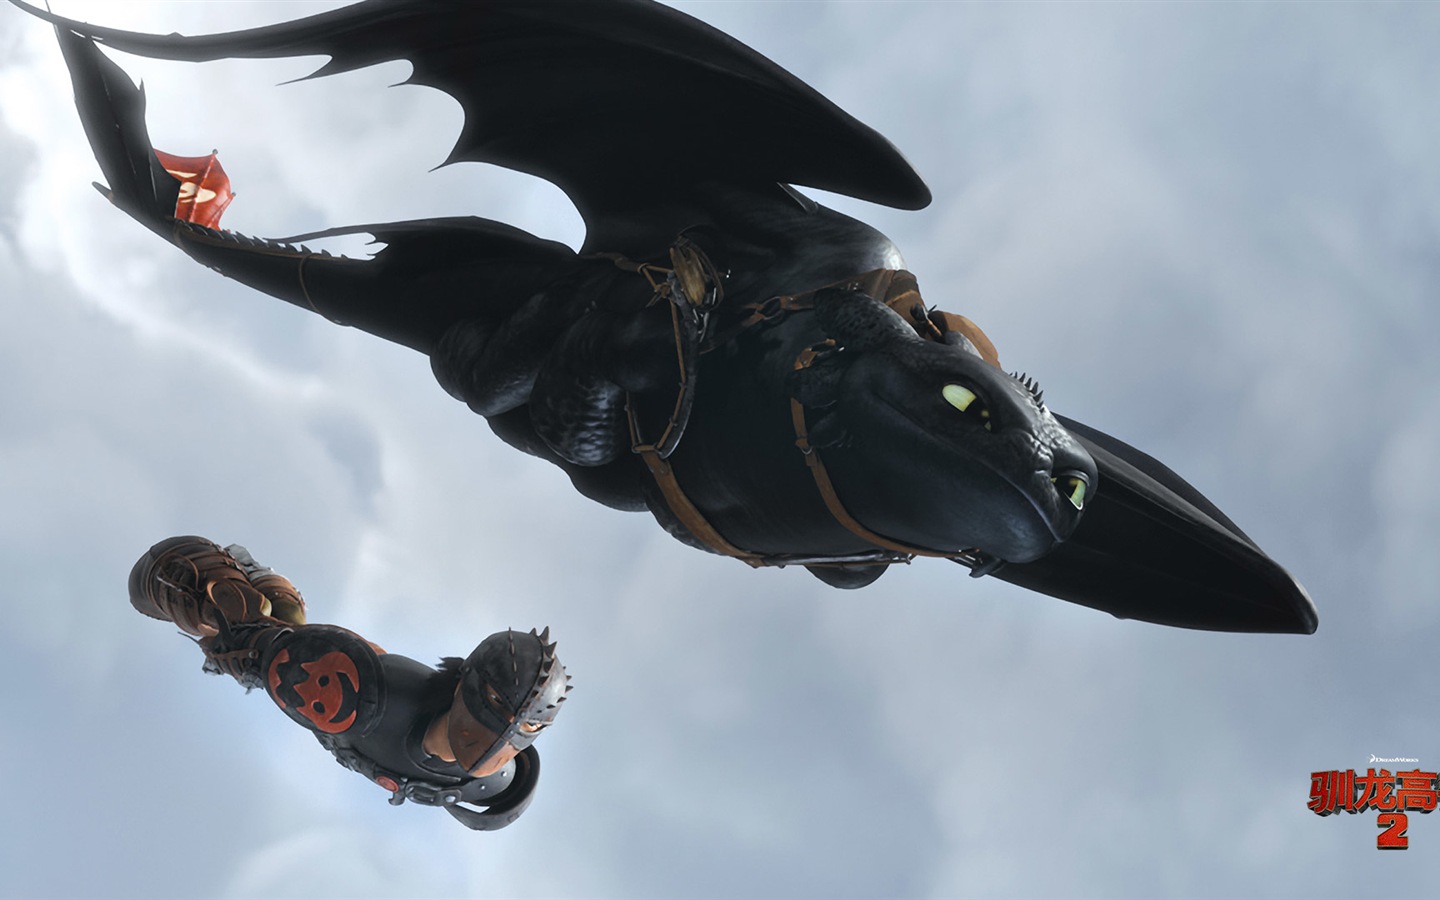 How to Train Your Dragon 2 驯龙高手2 高清壁纸6 - 1440x900